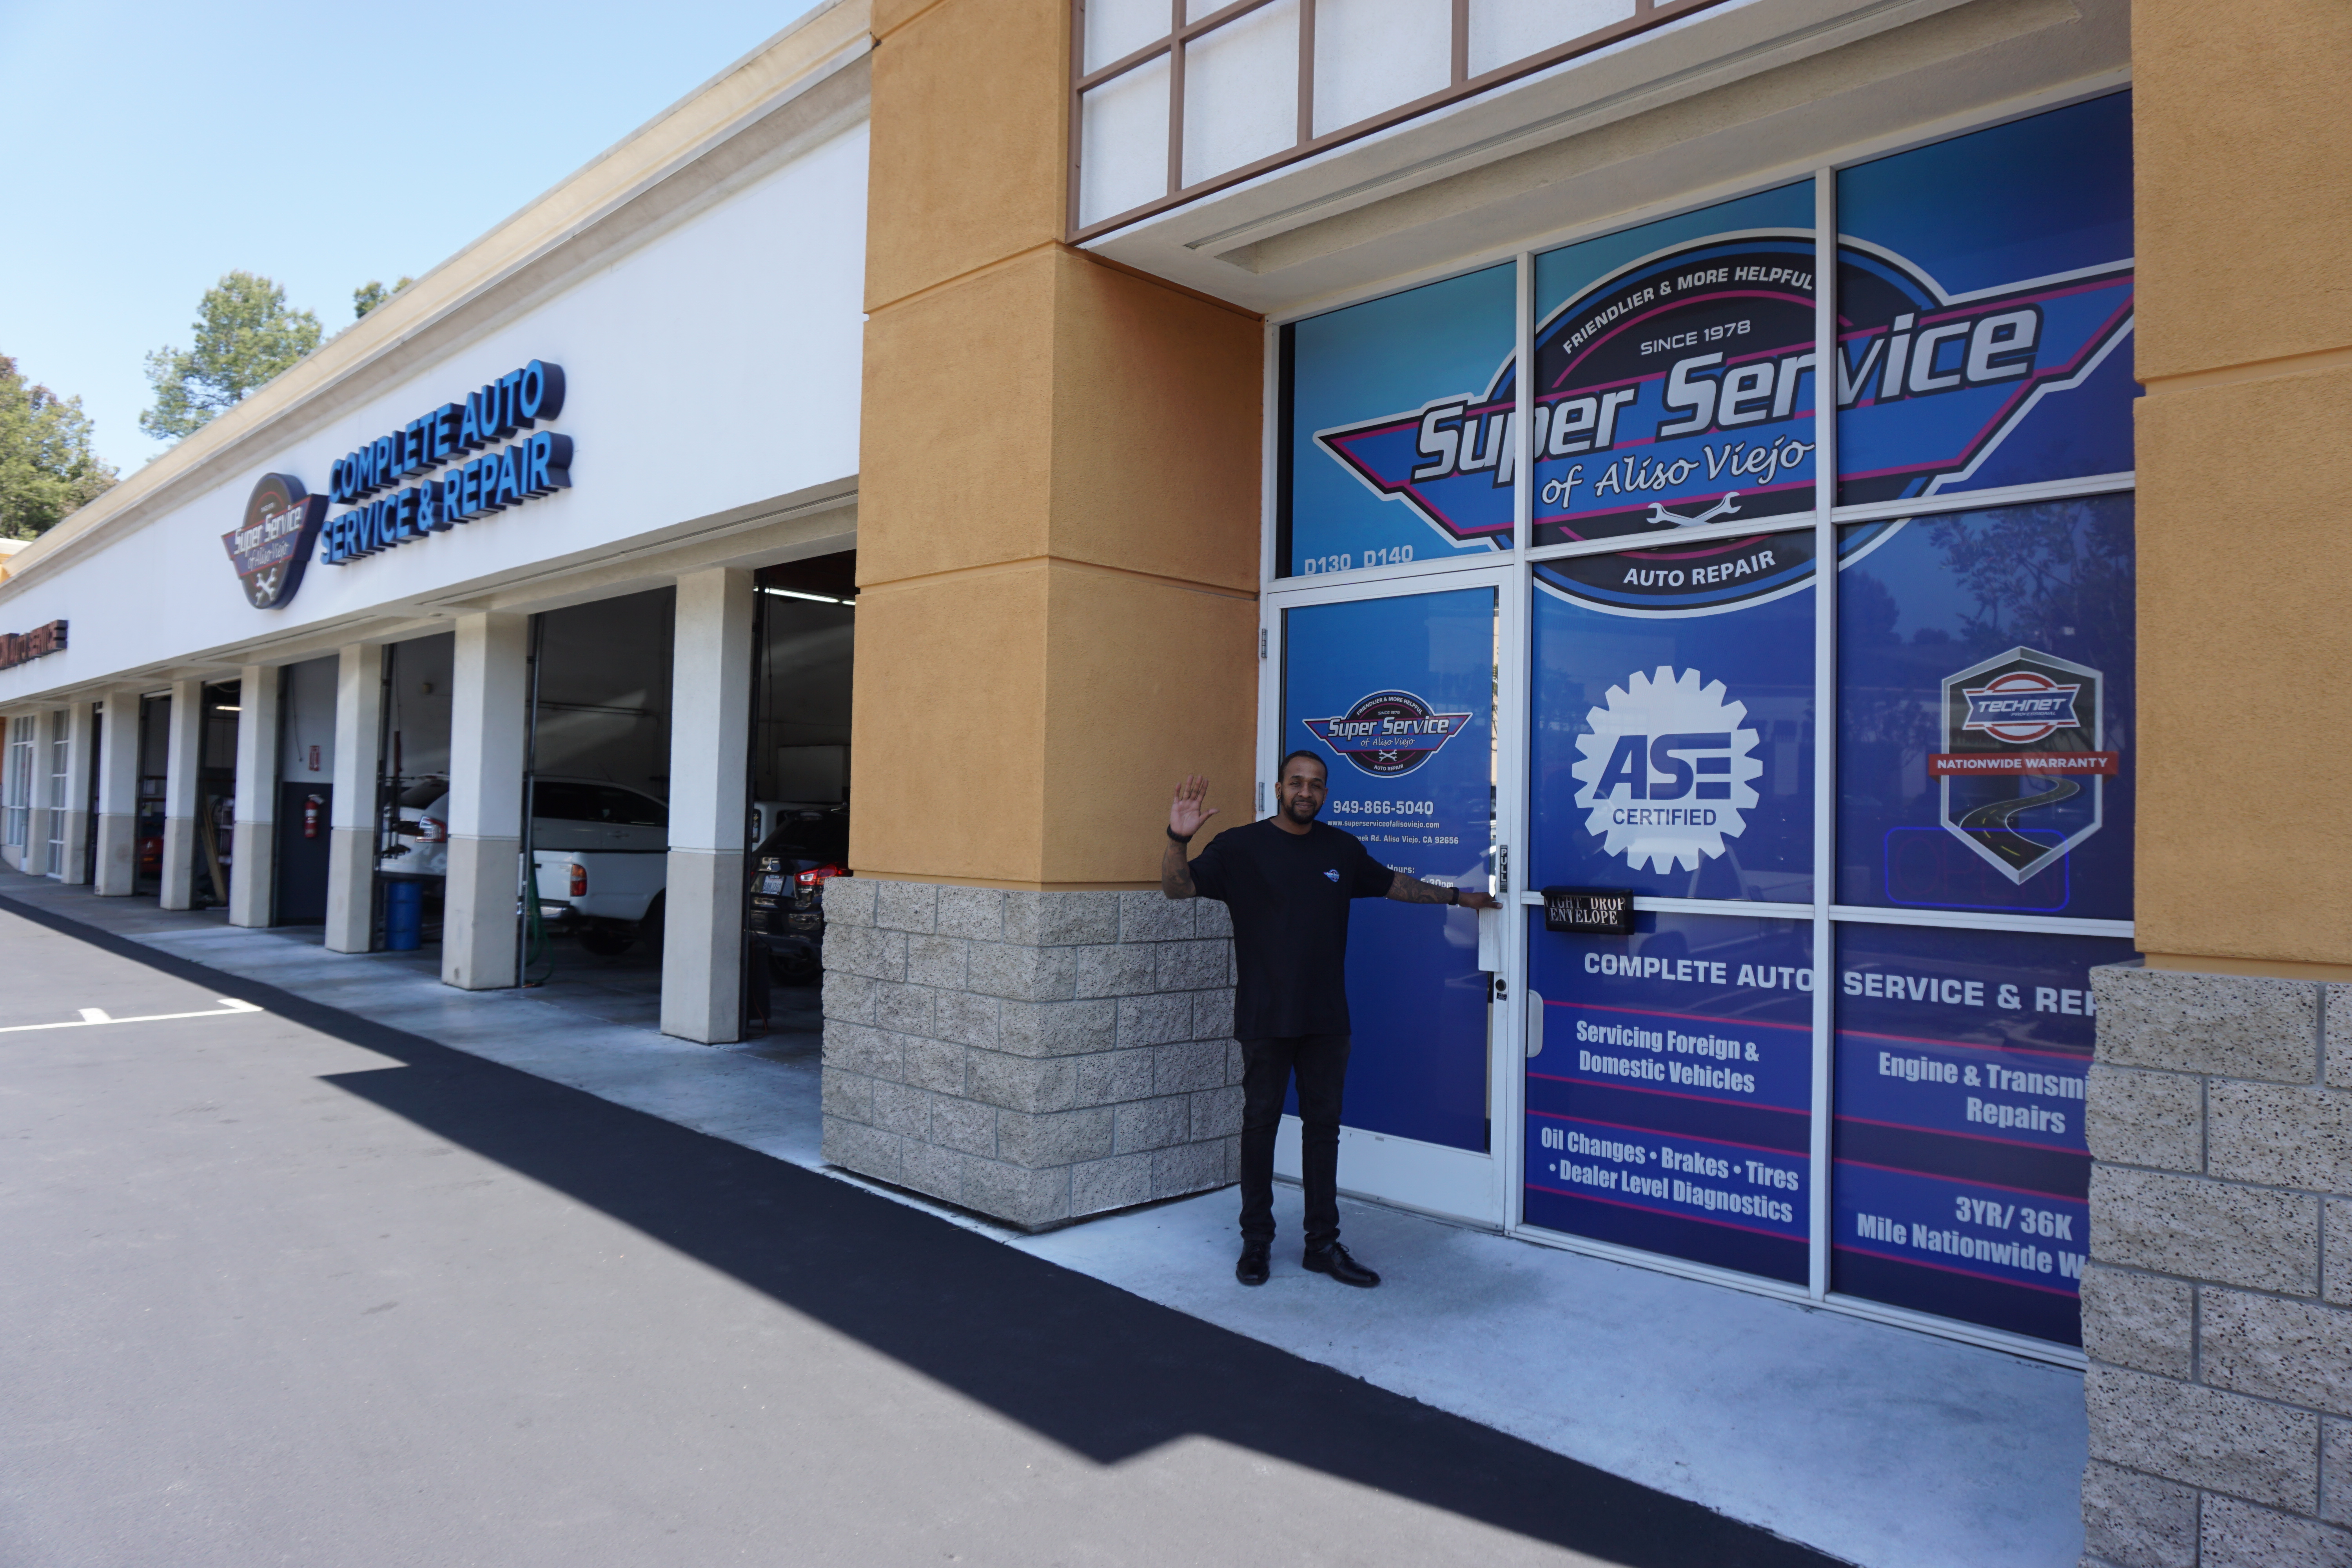 About Us Image - 55 | Super Service of Aliso Viejo